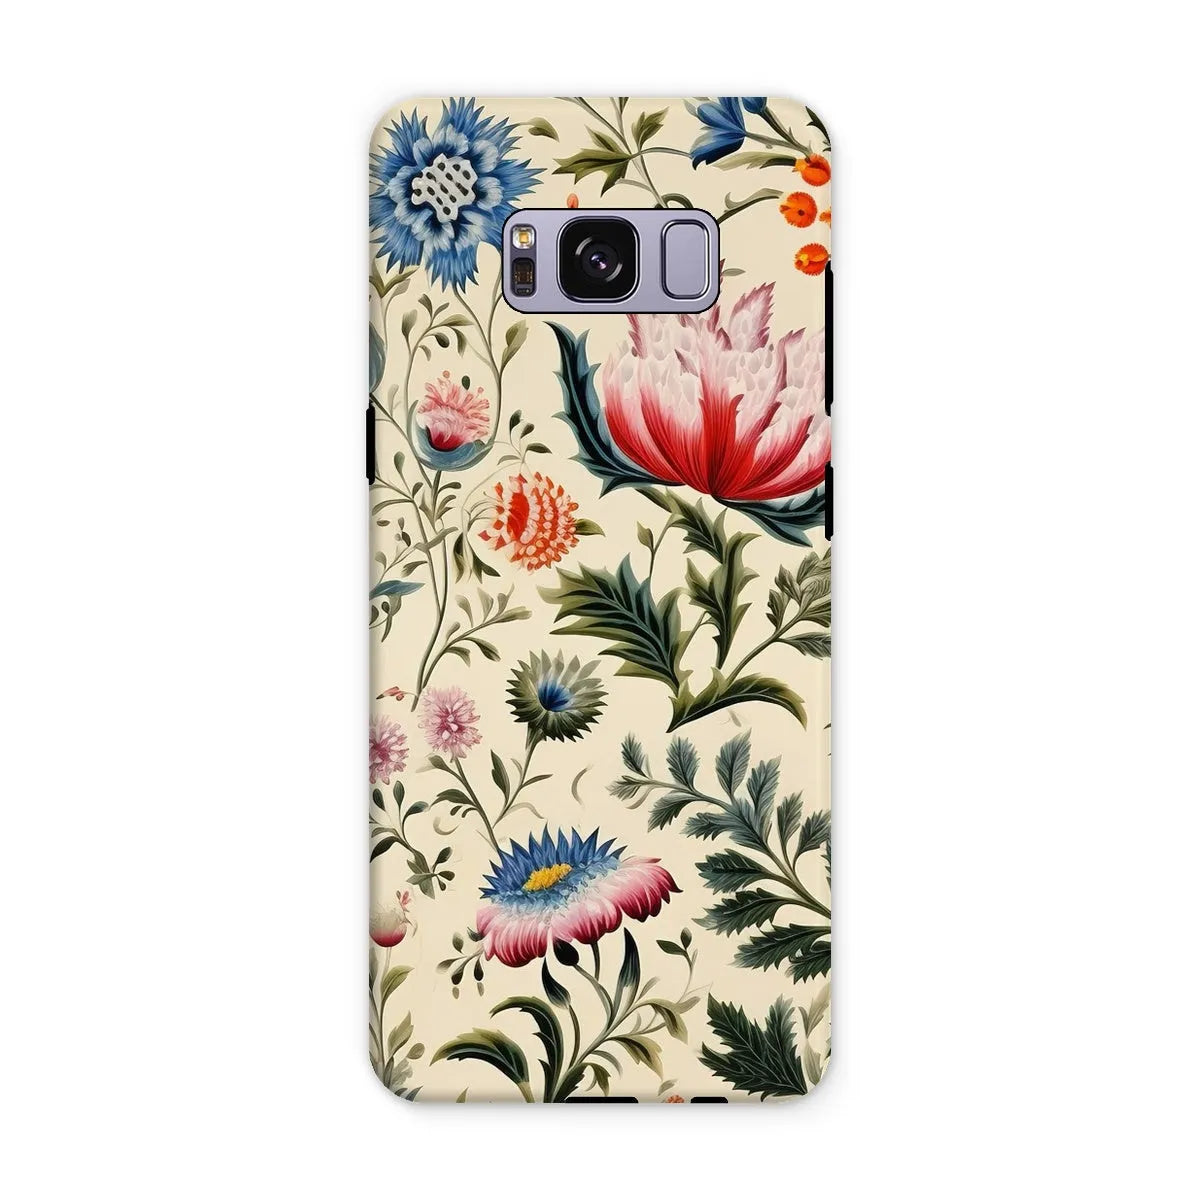 Wildflower Hoopla - Floral Garden Aesthetic Phone Case - Samsung Galaxy S8 Plus / Matte - Mobile Phone Cases